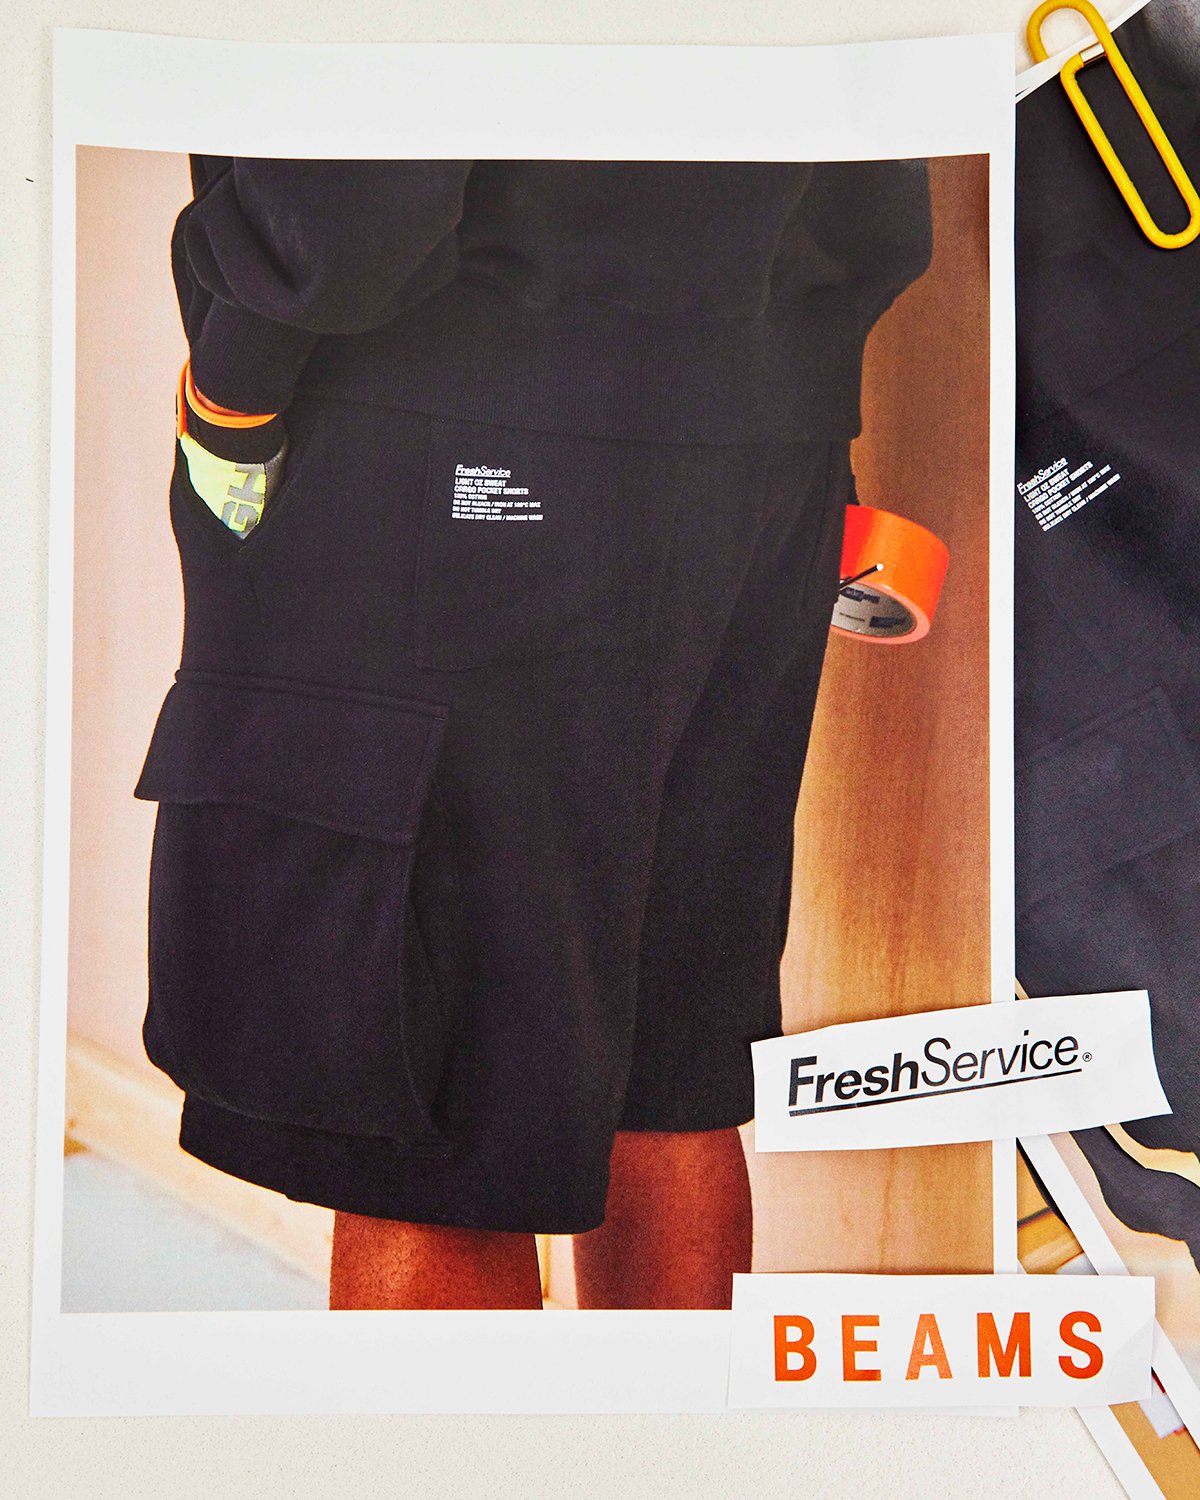 FreshService and BEAMS Unveil their Joint 'Urban Athletic Wear